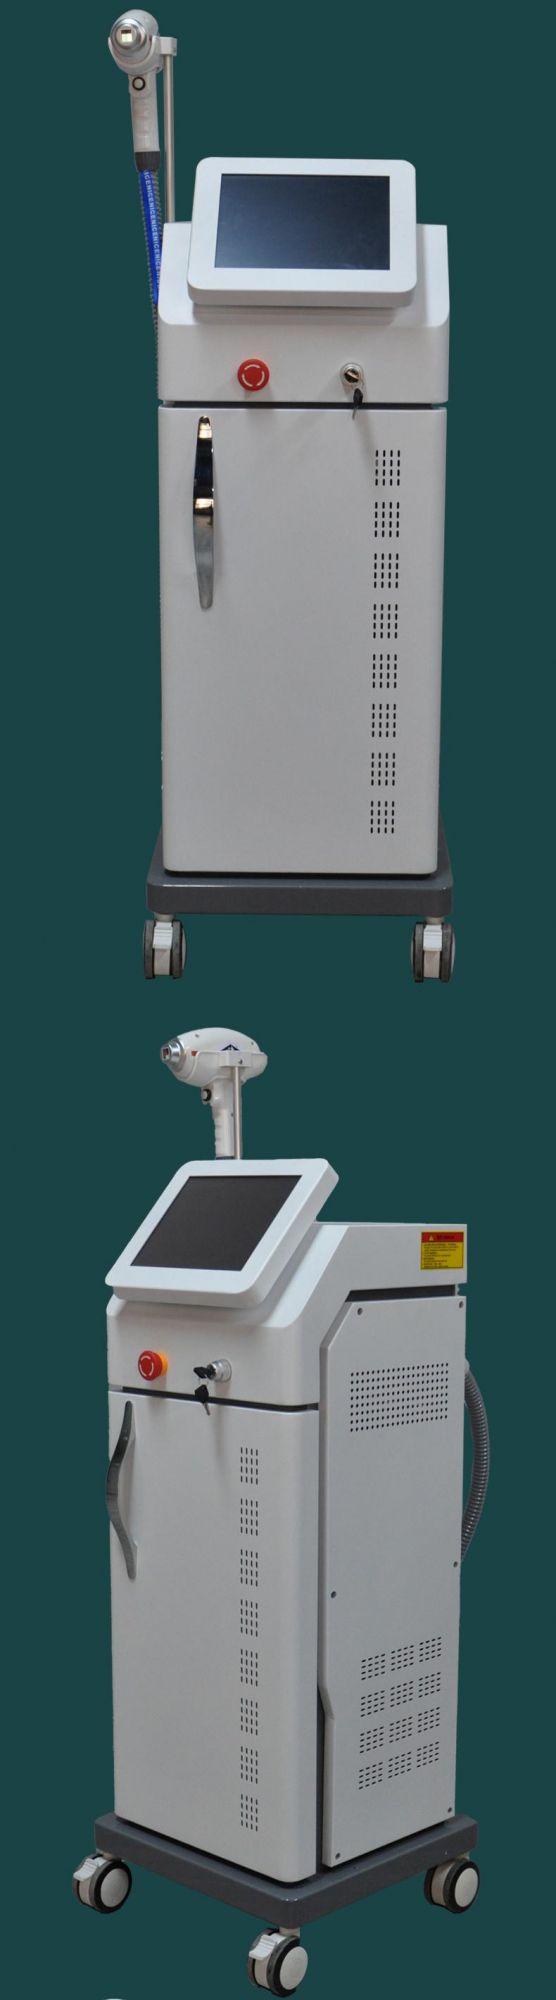 Fiber Coupled Hair Removal Channel 808nm Diode Laser/Diode Laser Hair Removal 808nm